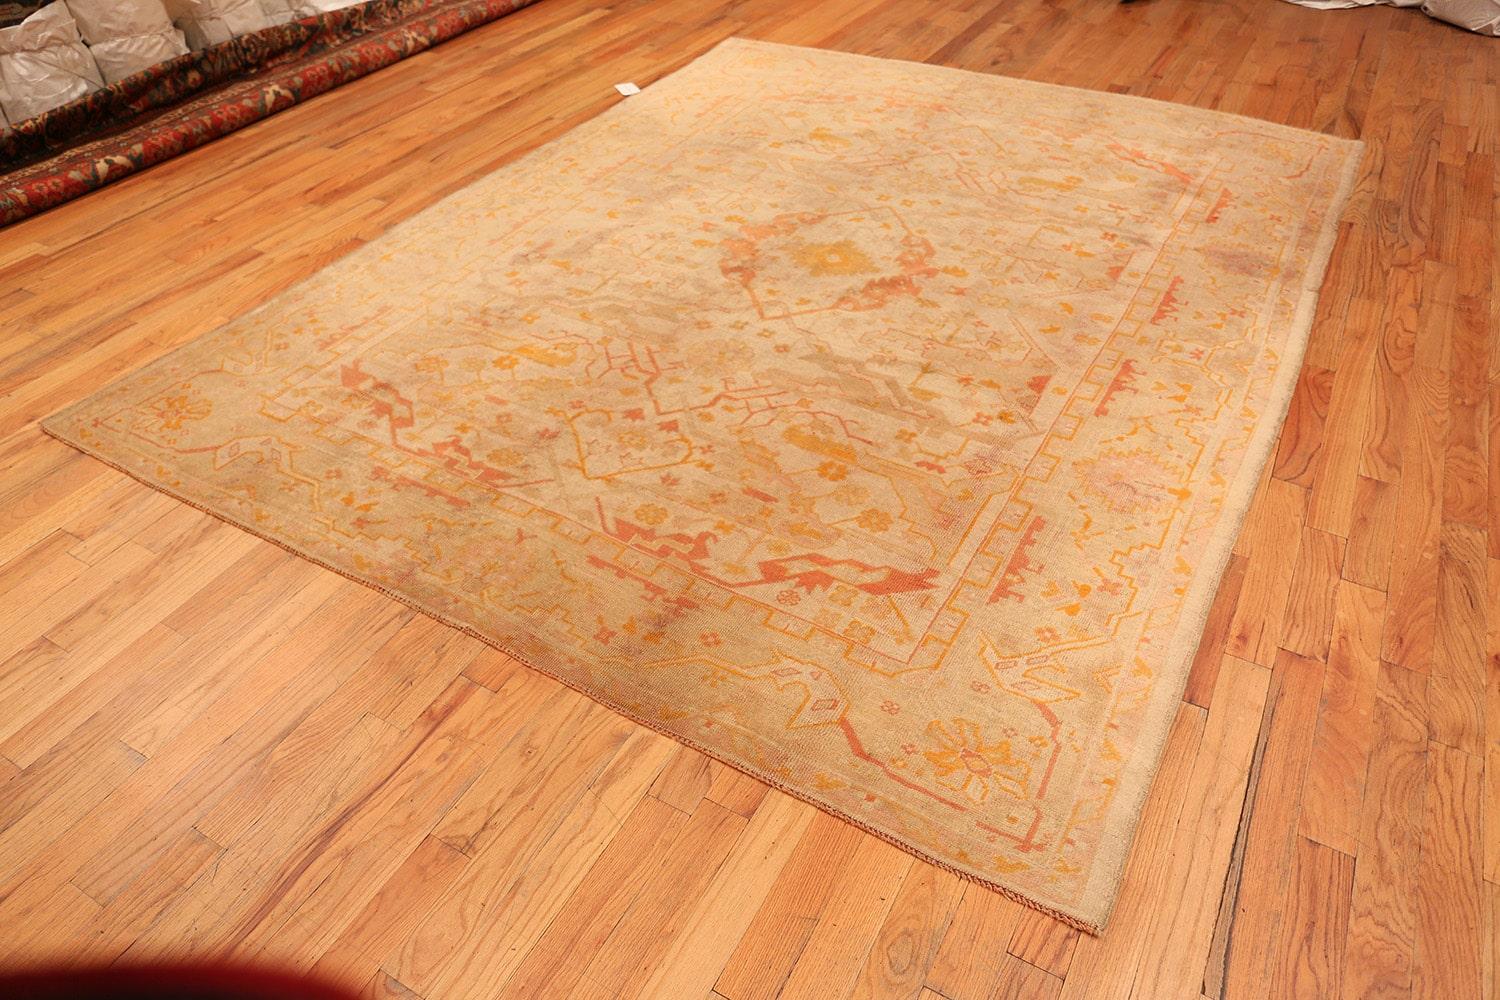 Wool Decorative Antique Turkish Oushak Rug. Size: 8 ft 3 in x 10 ft 9 in